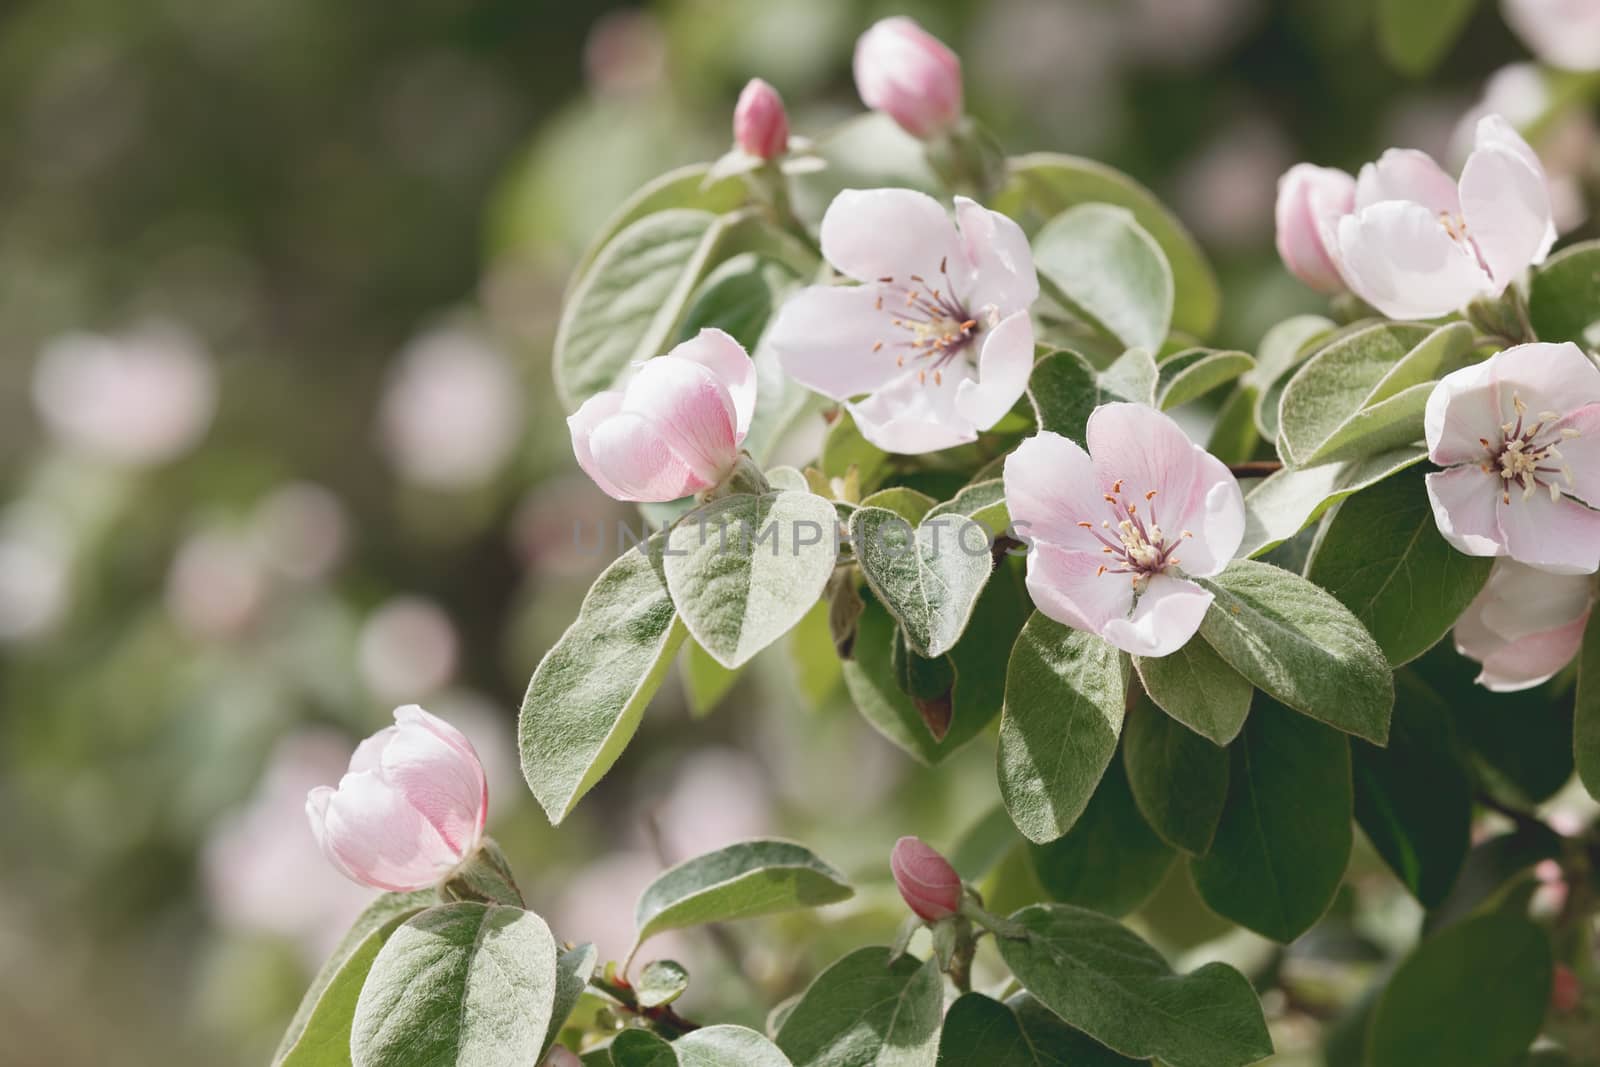 Quince flowers and leaves in spring orchard with beautiful bokeh. Soft focus